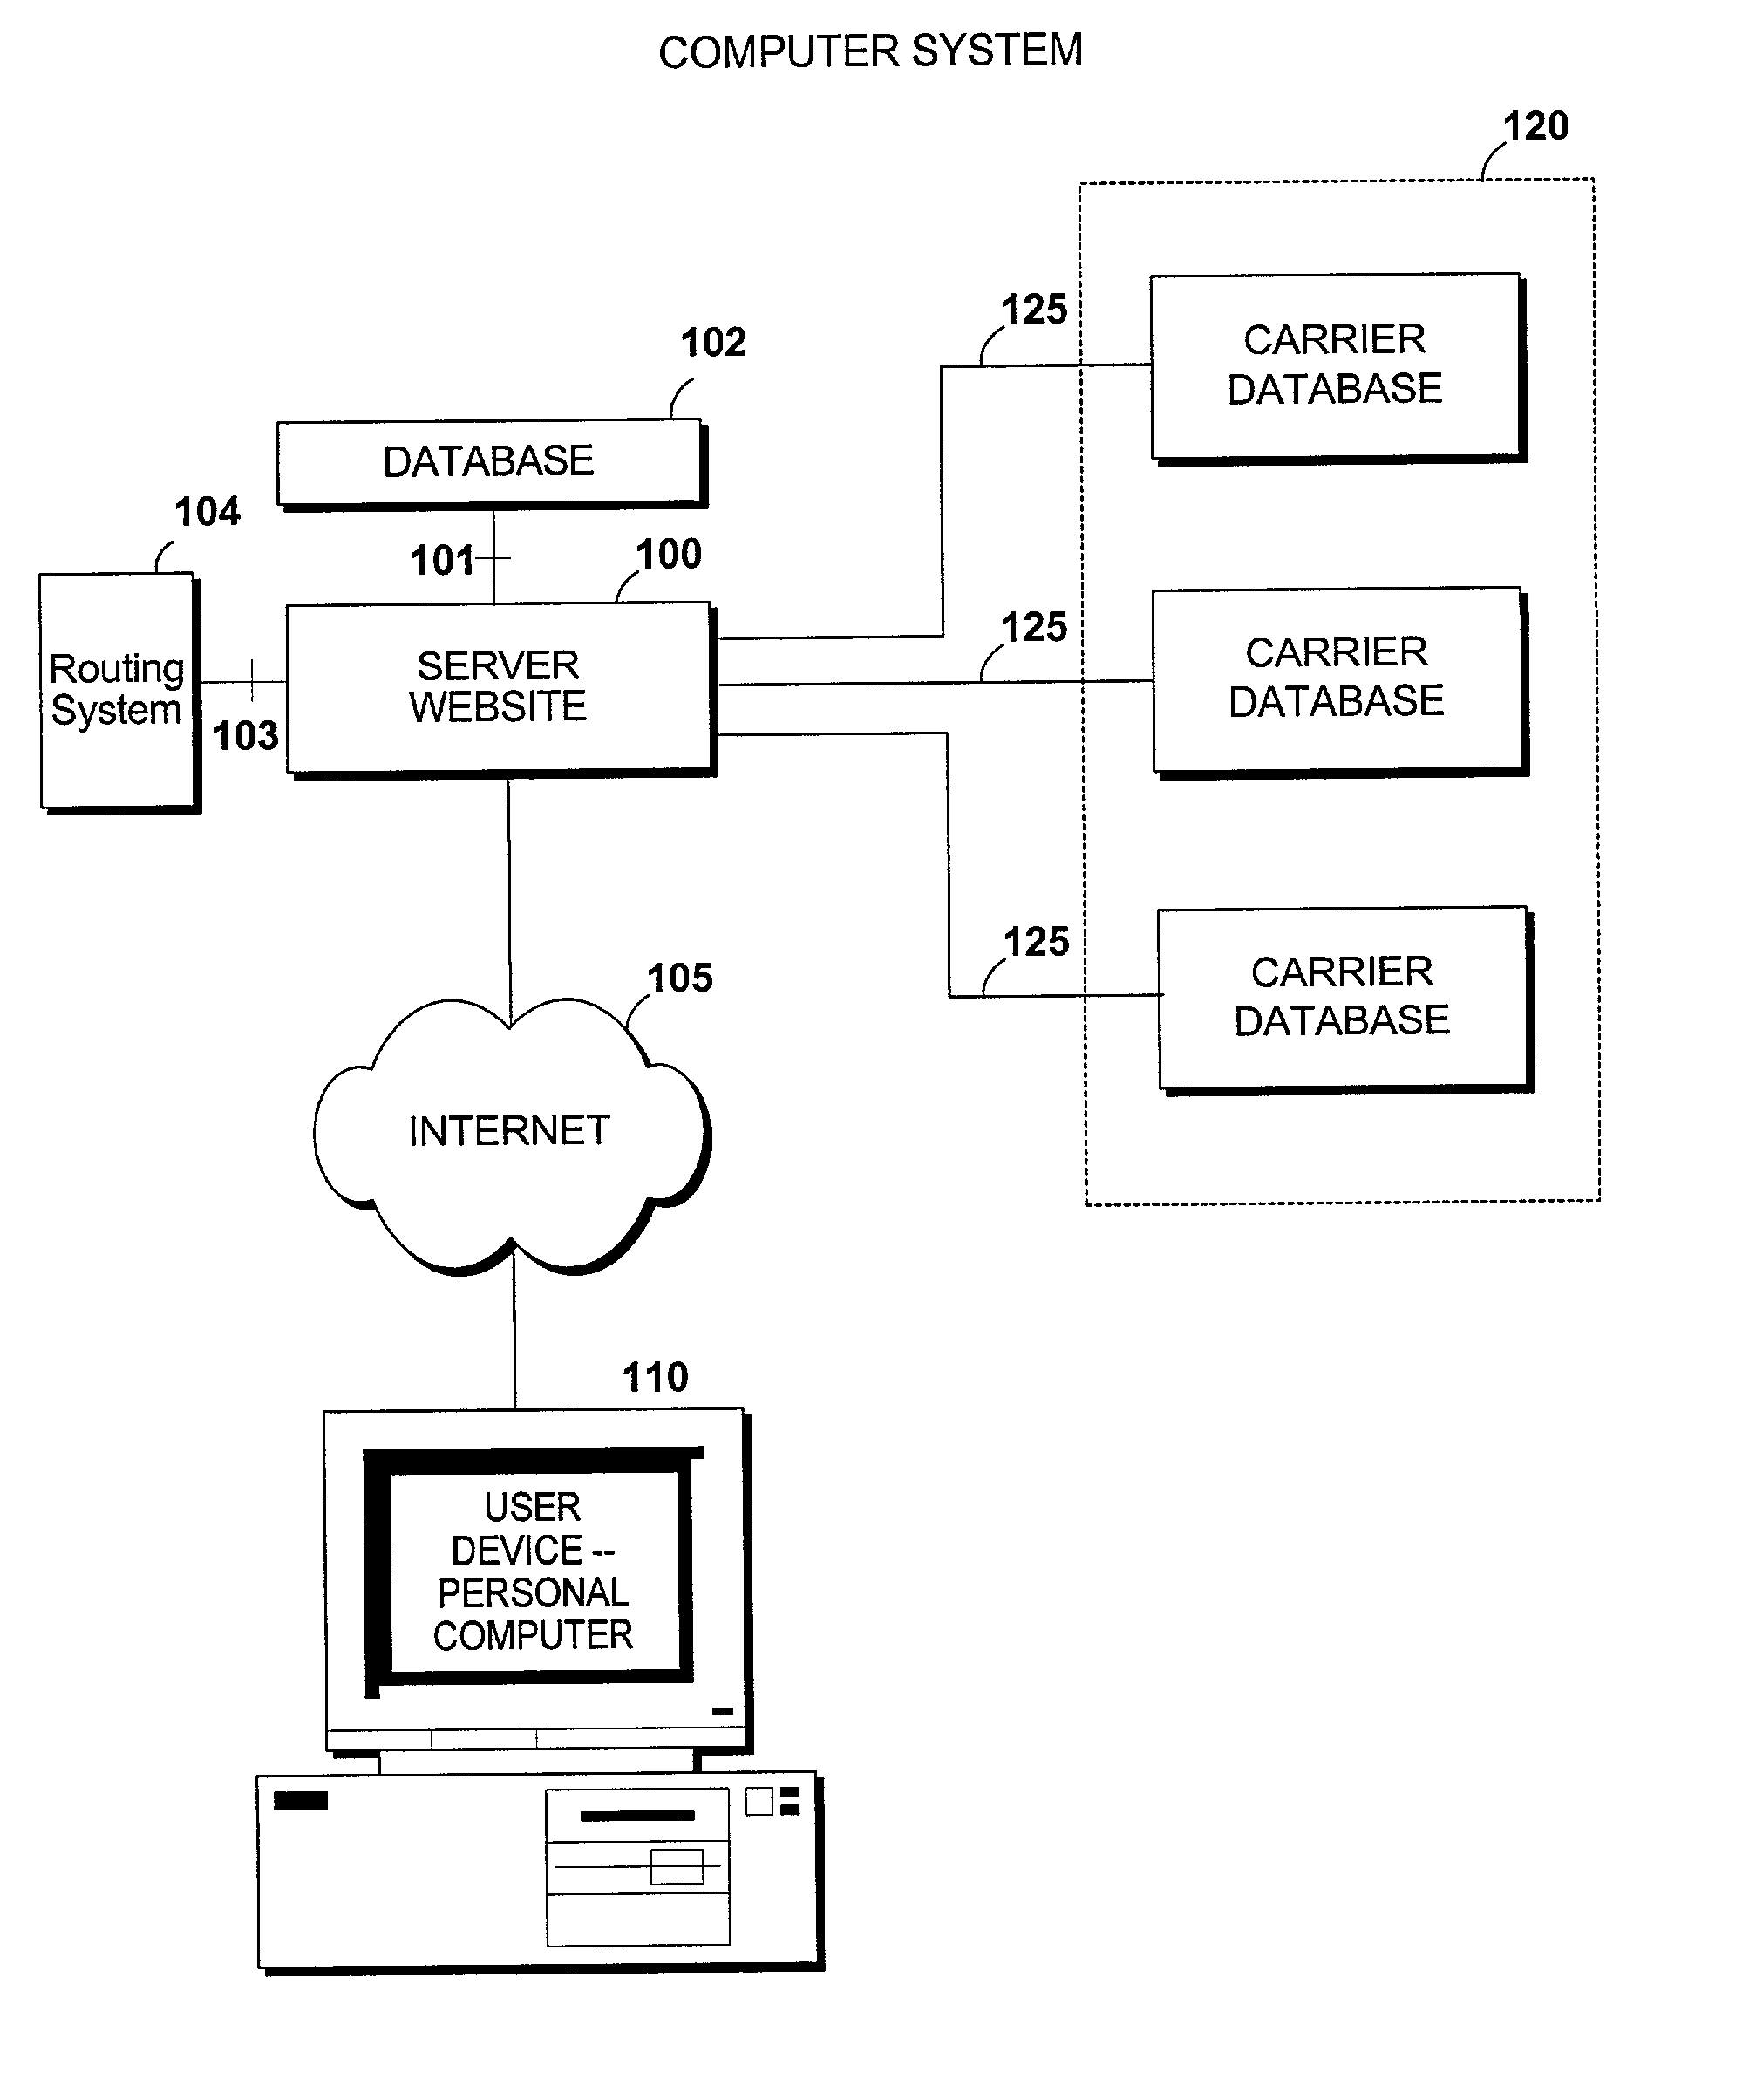 Method and computer system for generating historical claims loss data reports